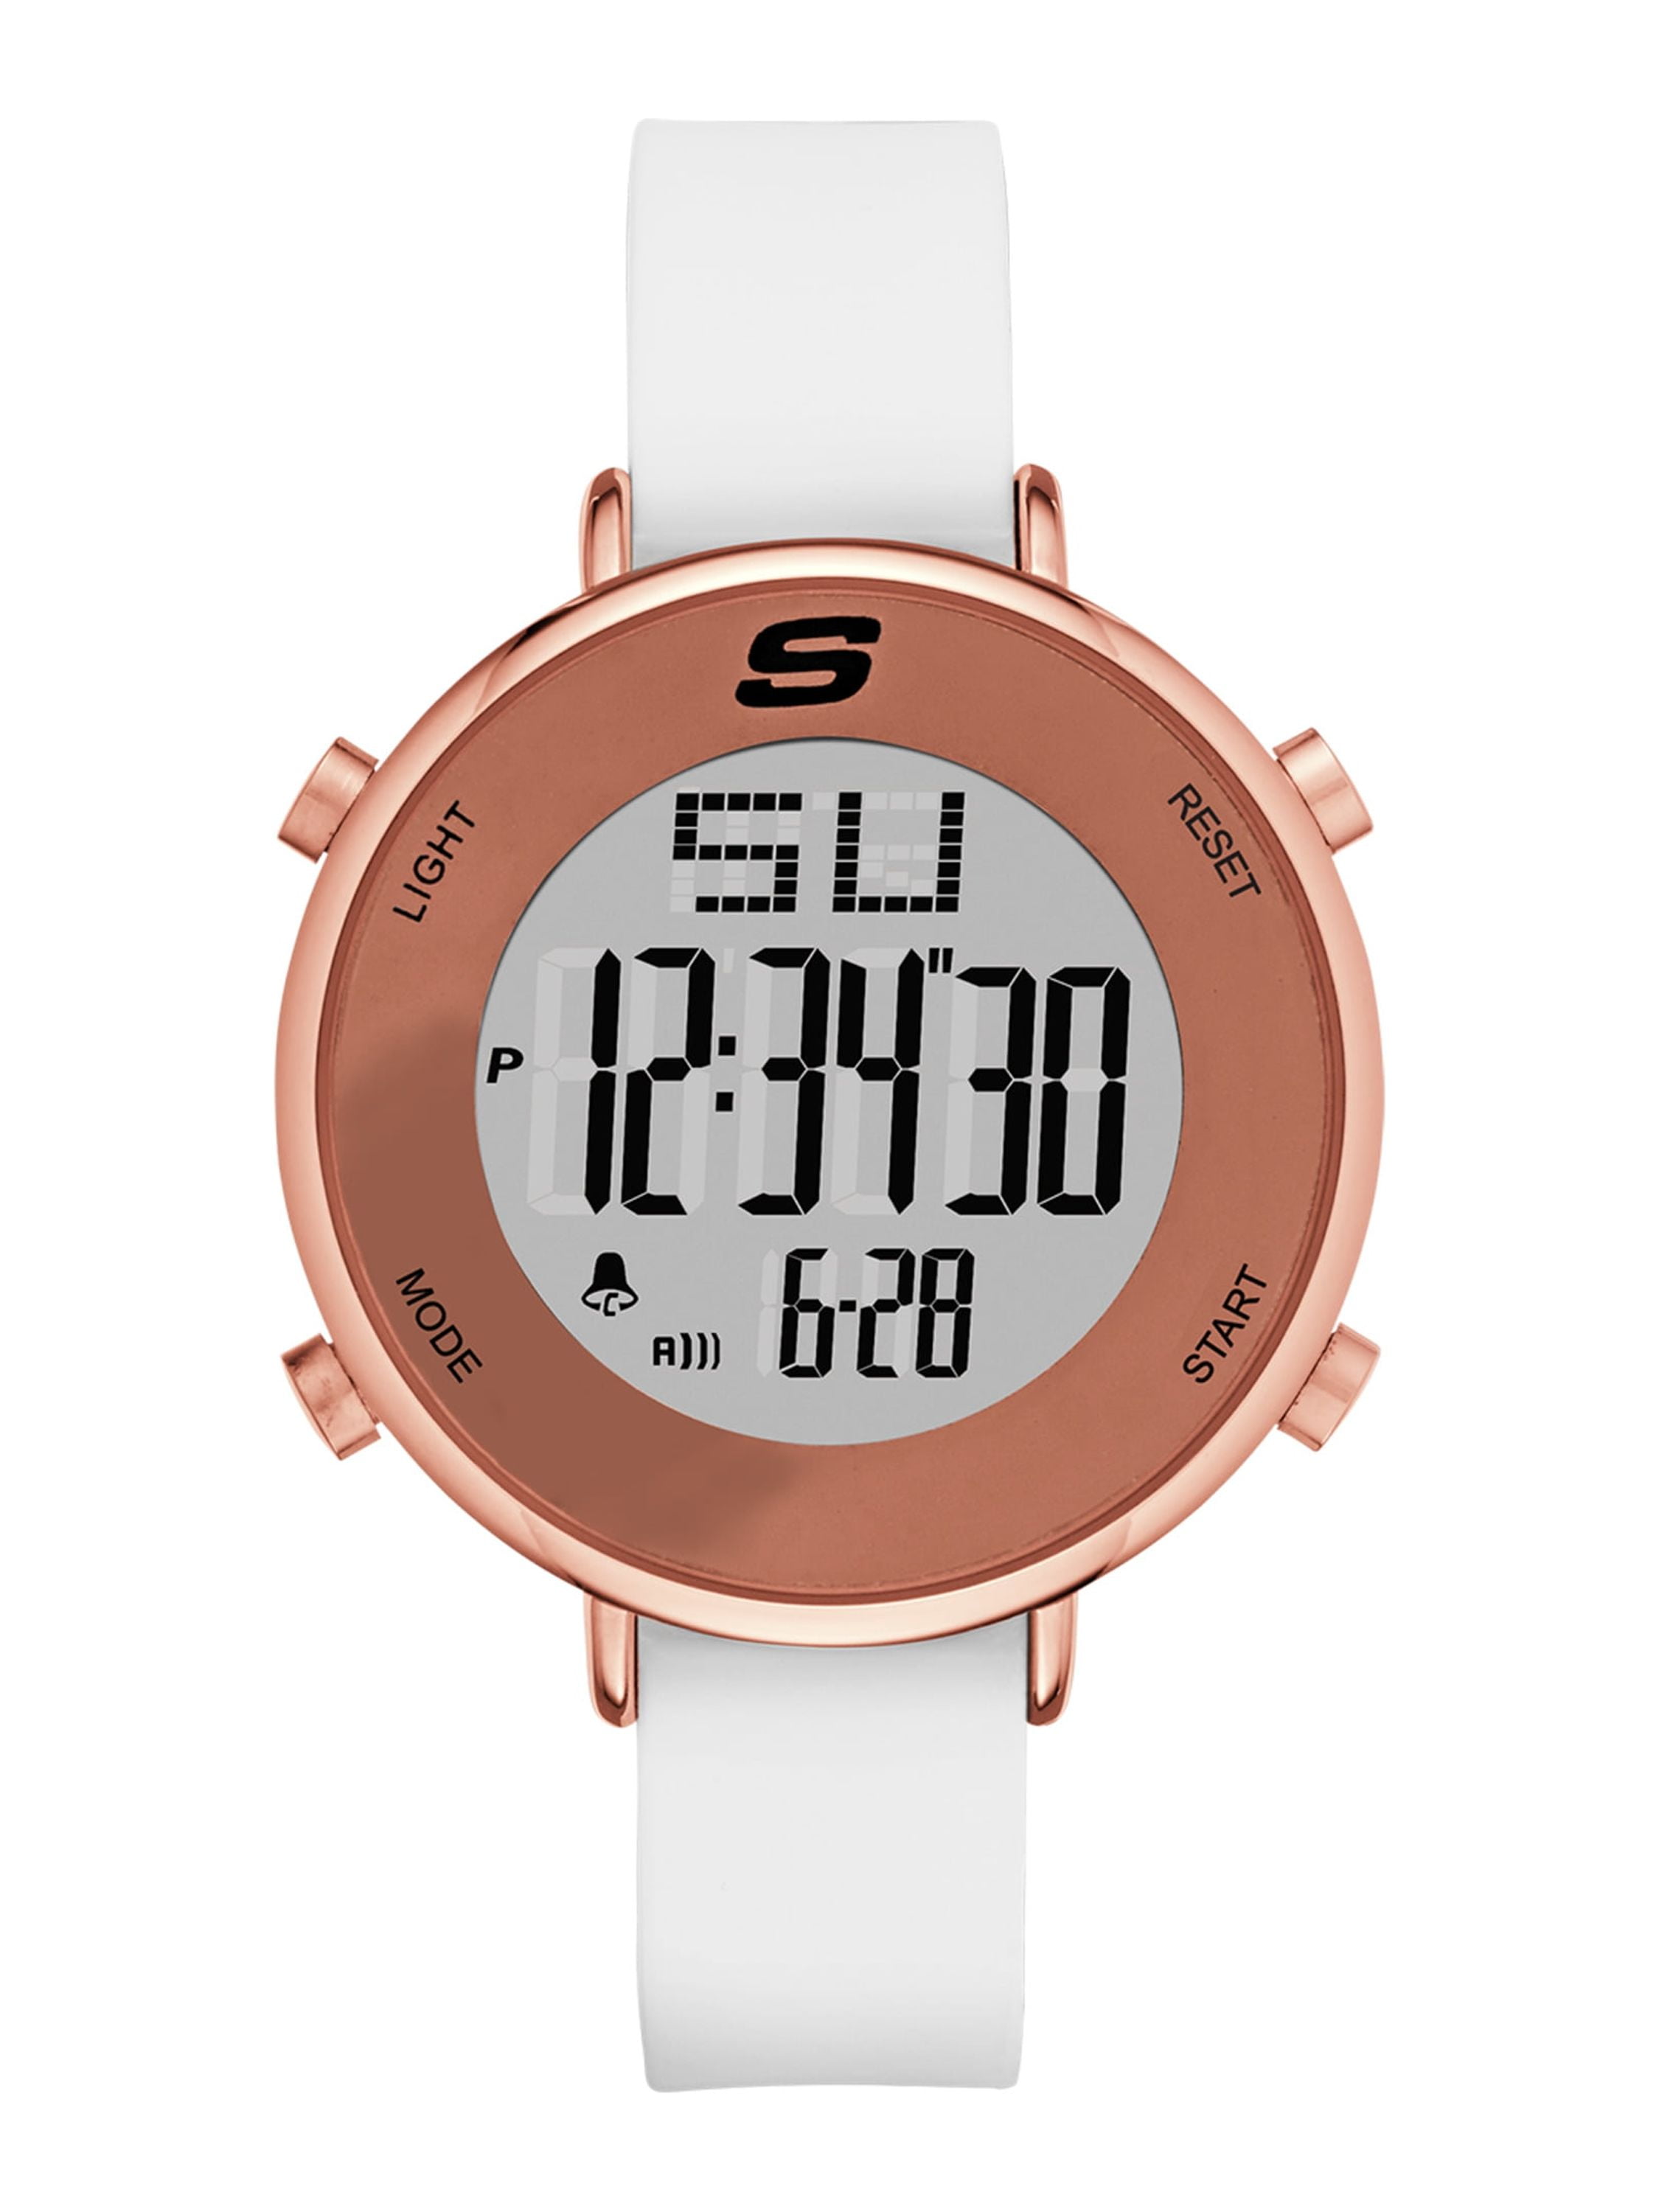 Skechers Magnolia 40MM Digital Chronograph Watch with Silicone Strap and  Metal Case, White and Rose Gold Tone